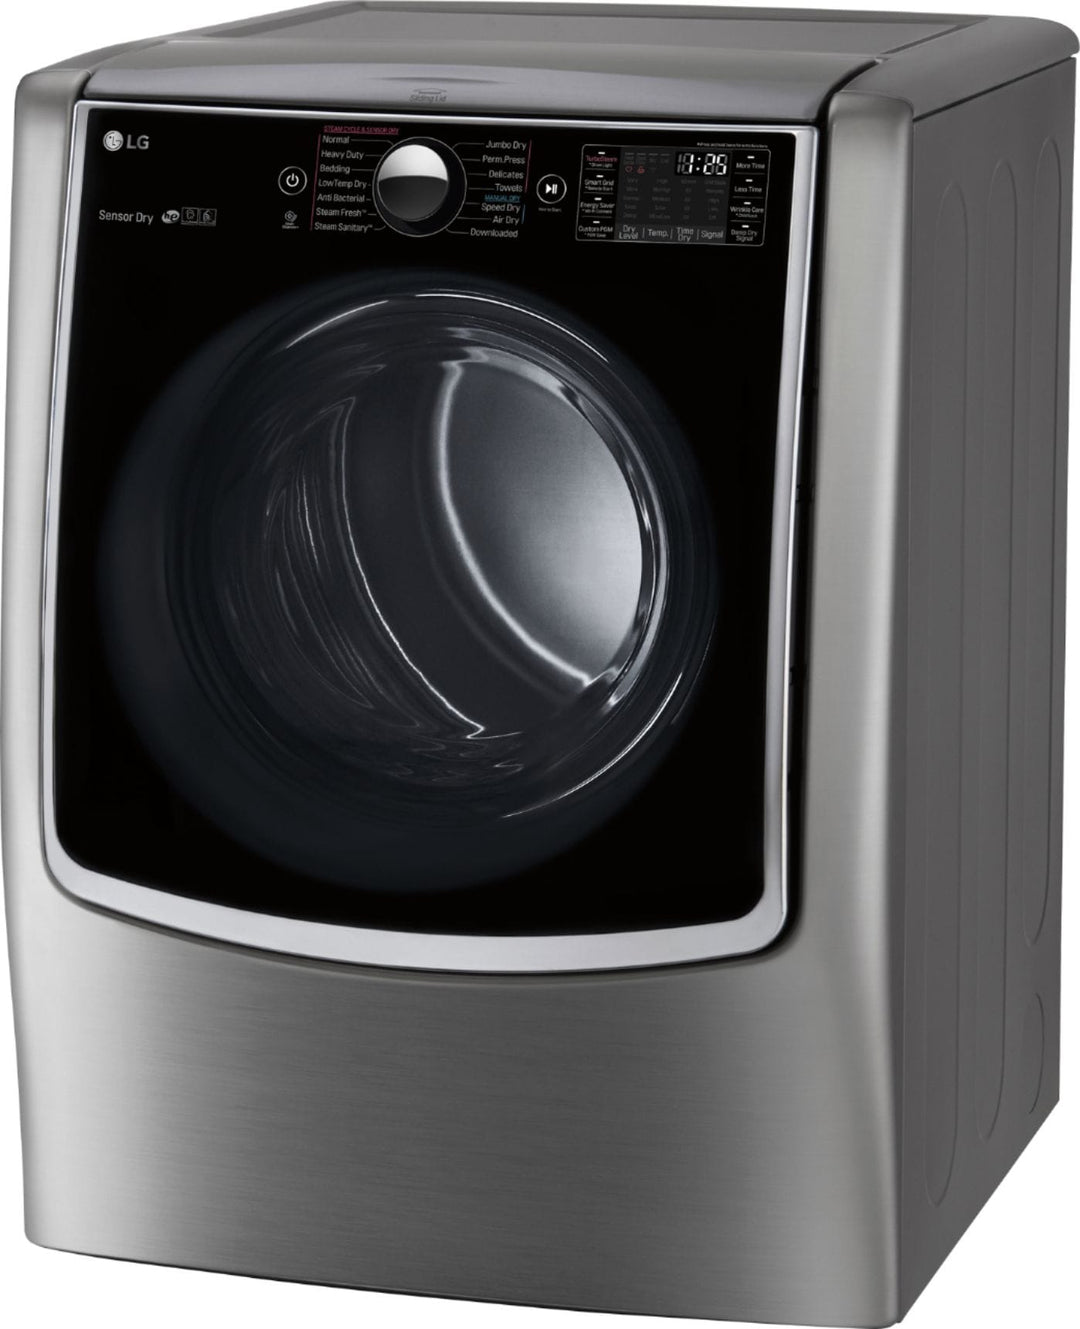 LG - 9.0 Cu. Ft. Smart Electric Dryer with Steam and Sensor Dry - Graphite steel_13